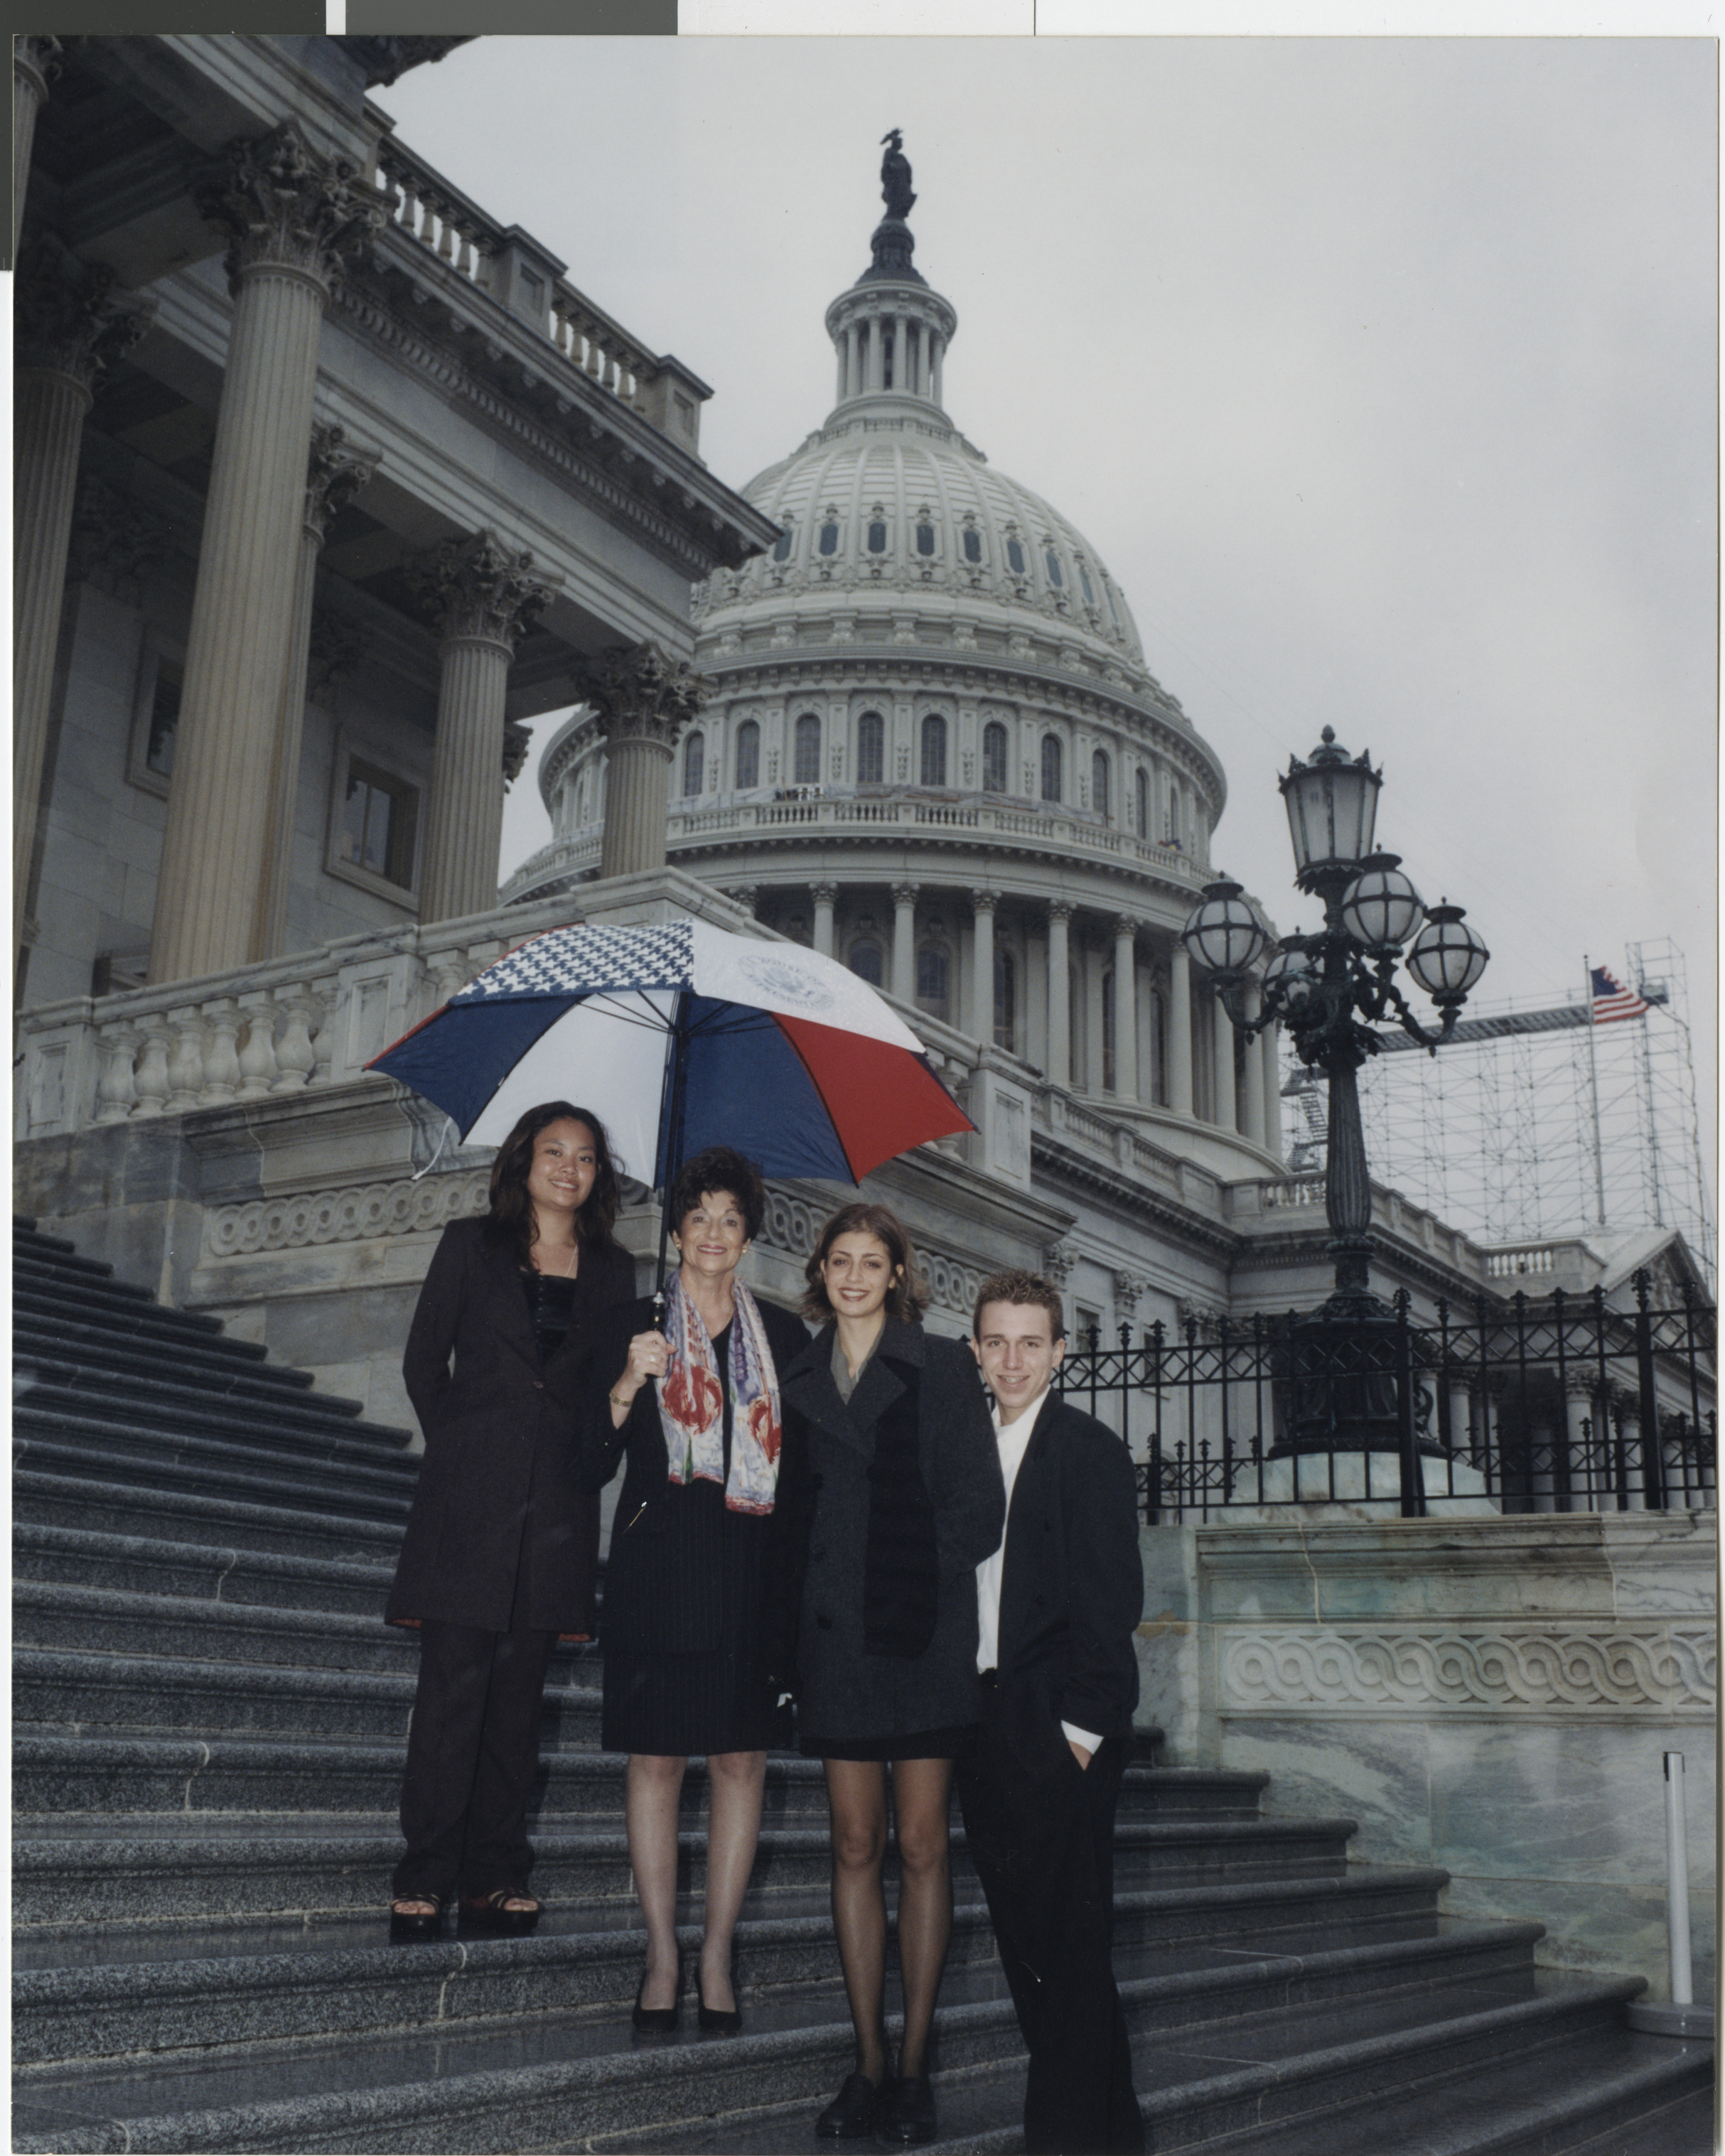 Photograph of Shelley Berkley on the steps of the U.S. Capitol Building with unidentified people, undated